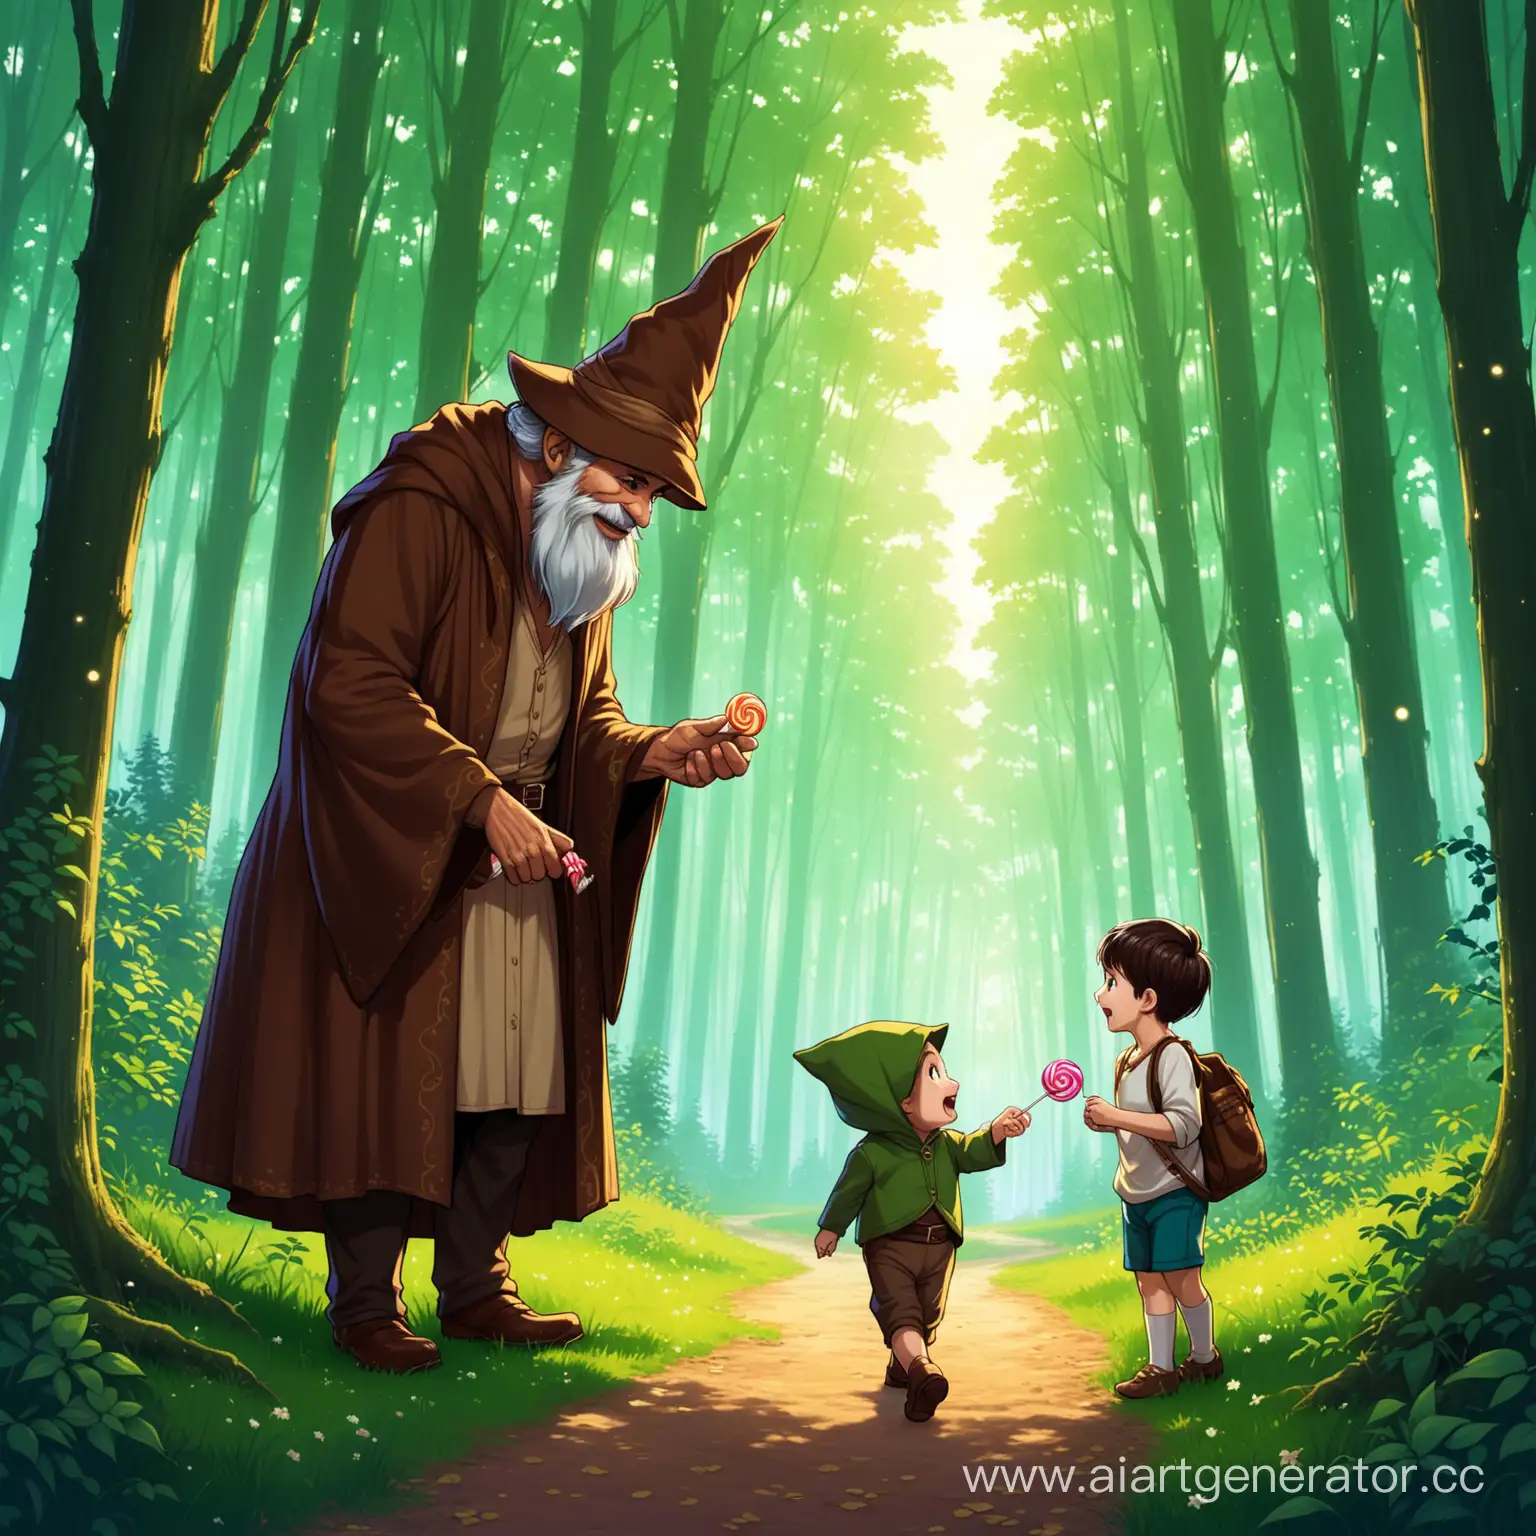 Unexpected-Encounter-Meeting-a-Strange-Uncle-in-the-Forest